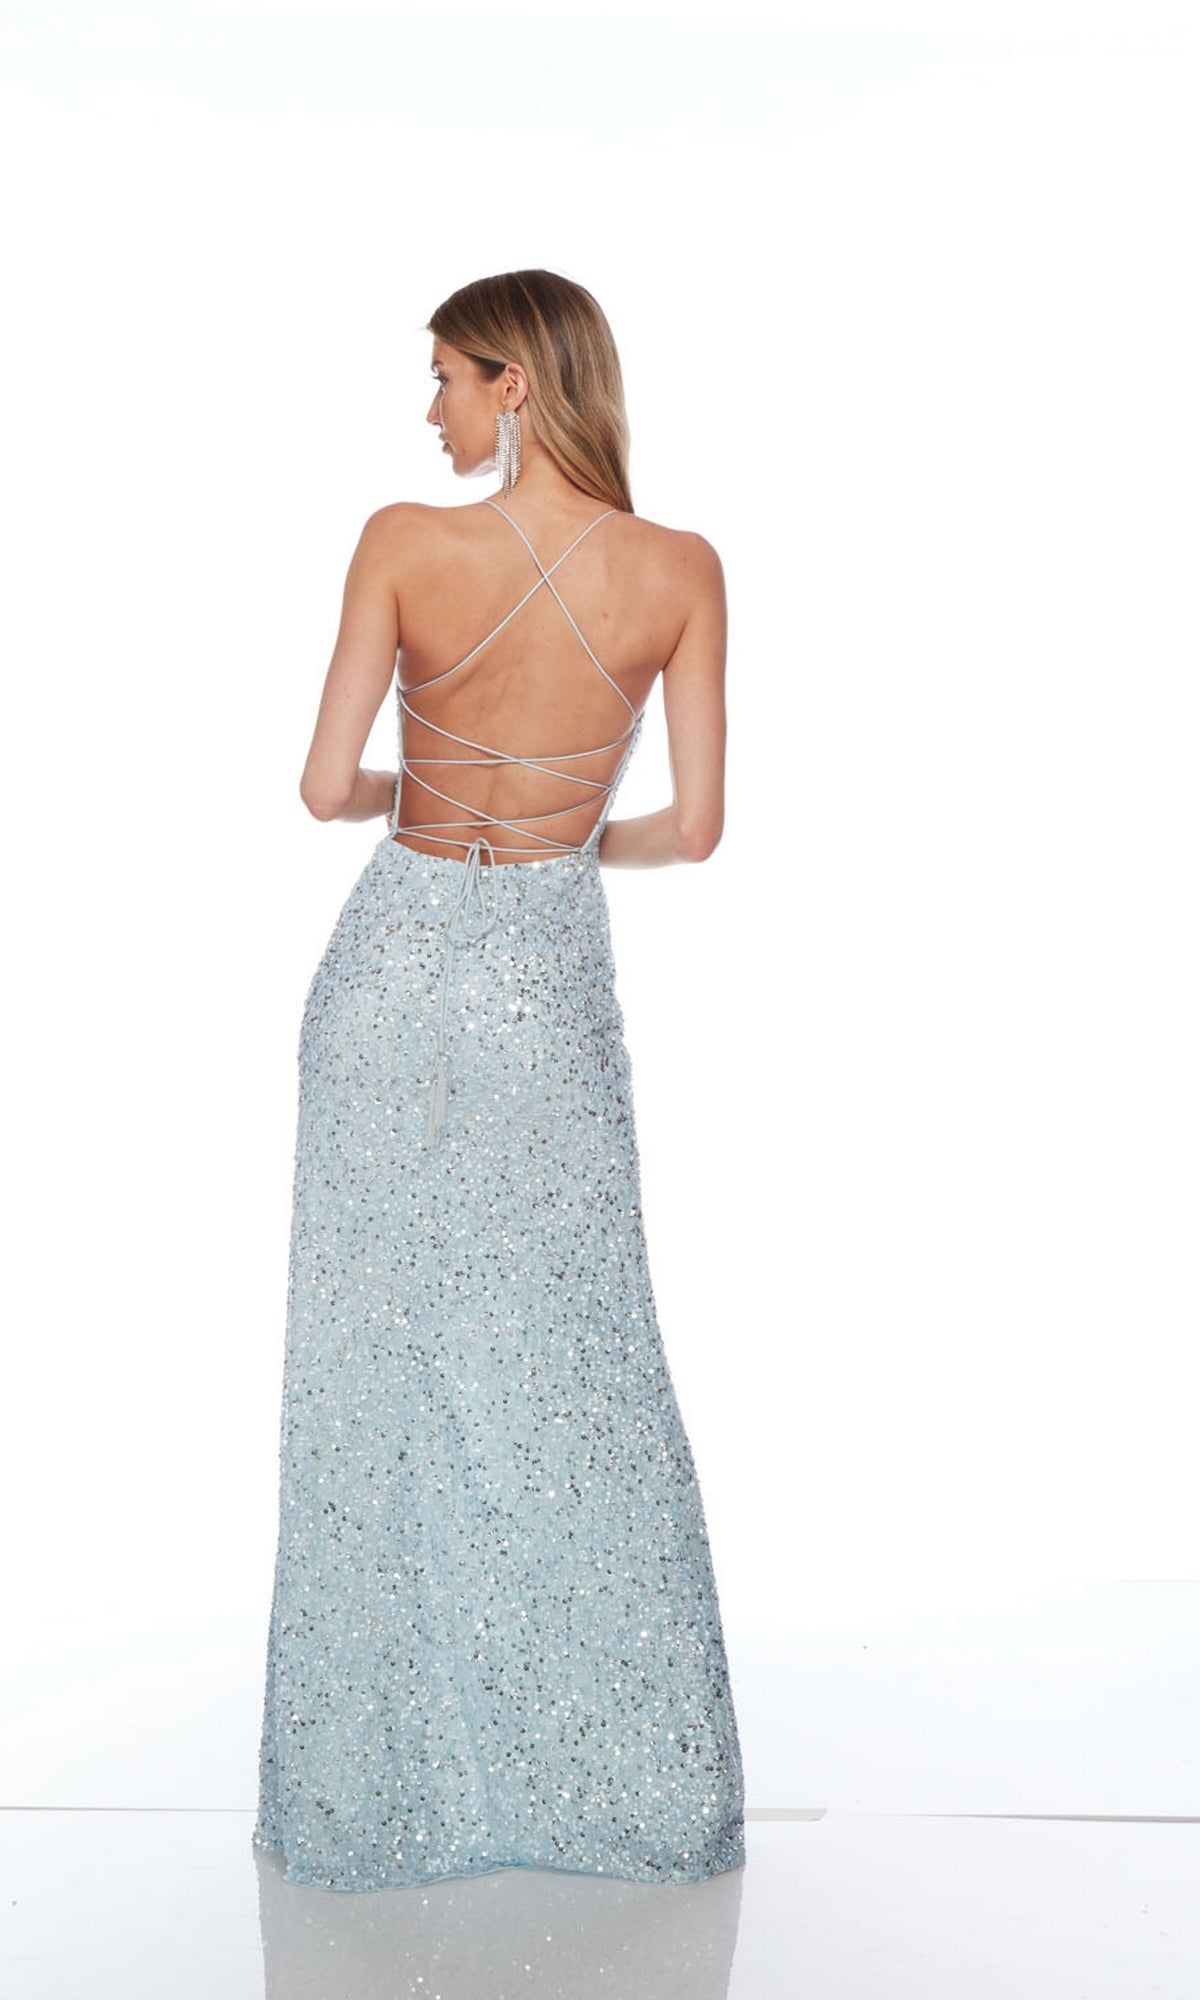 Alyce Hand-Beaded Long Sequin Prom Gown 88000